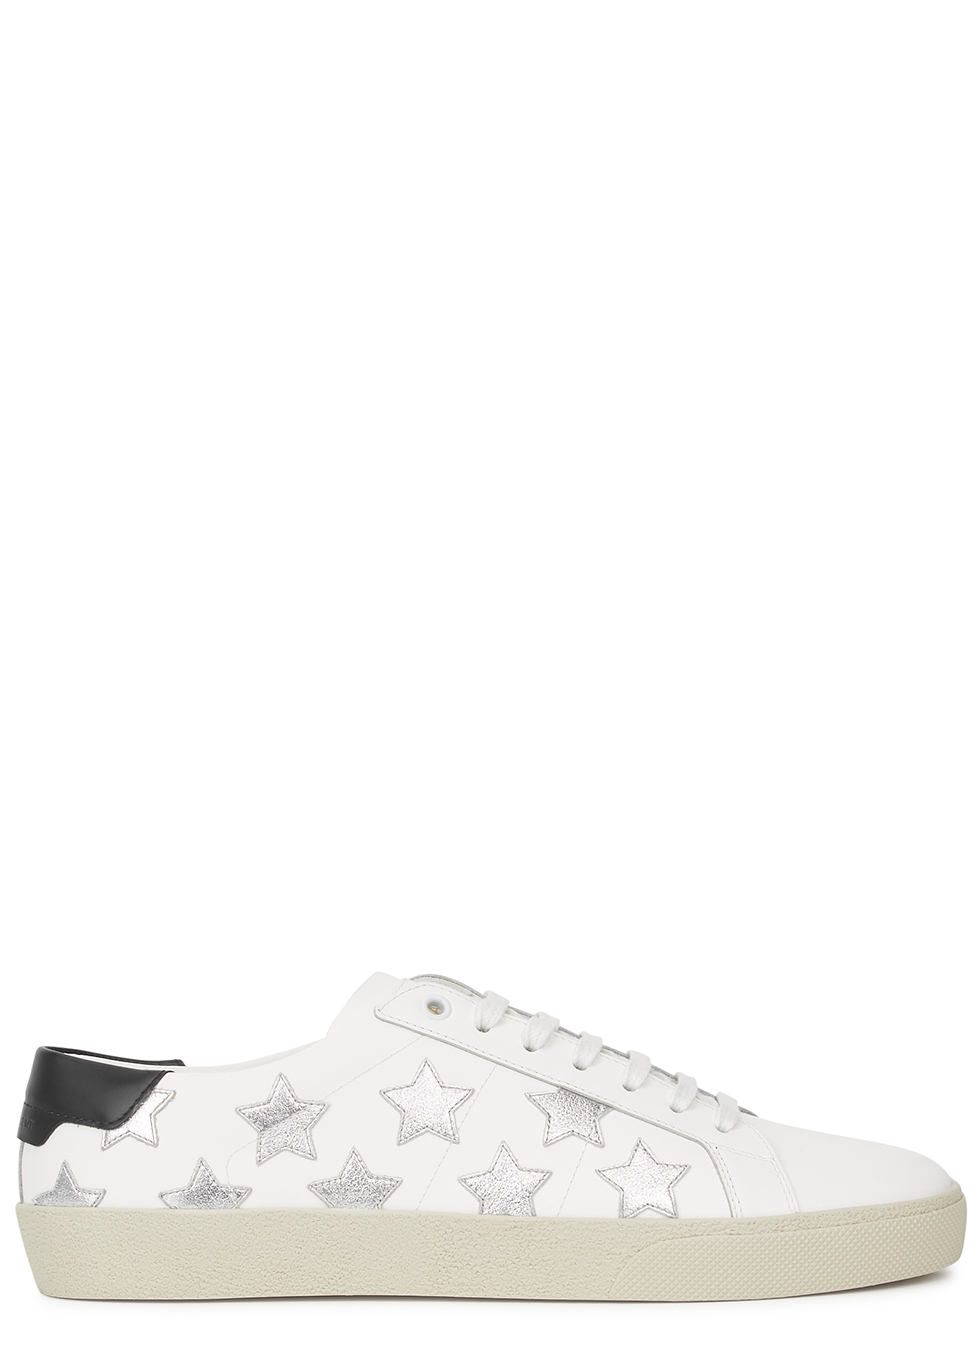 white leather sneakers with stars